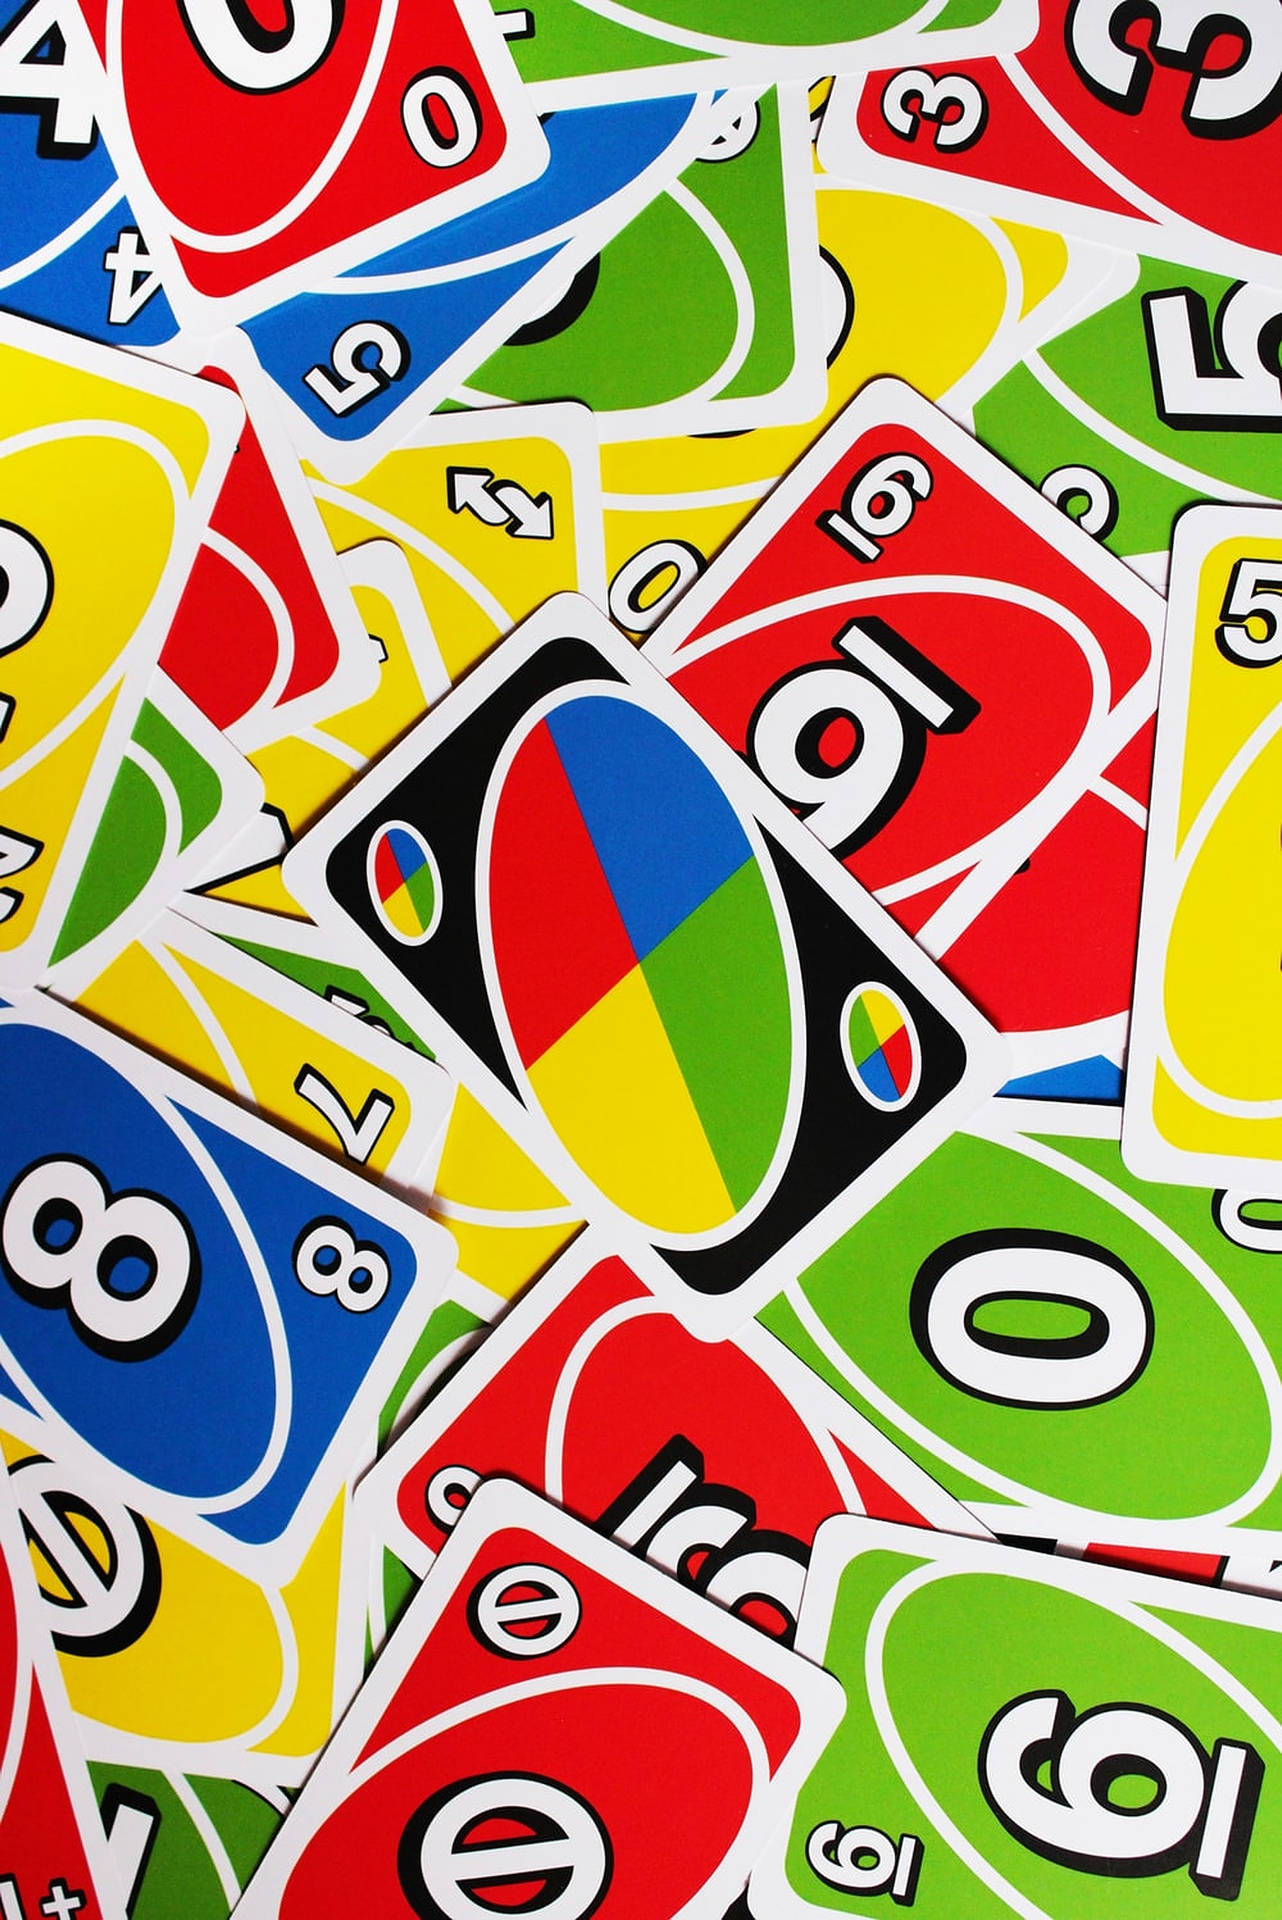 Vibrantly Colored Uno Cards Spread Out